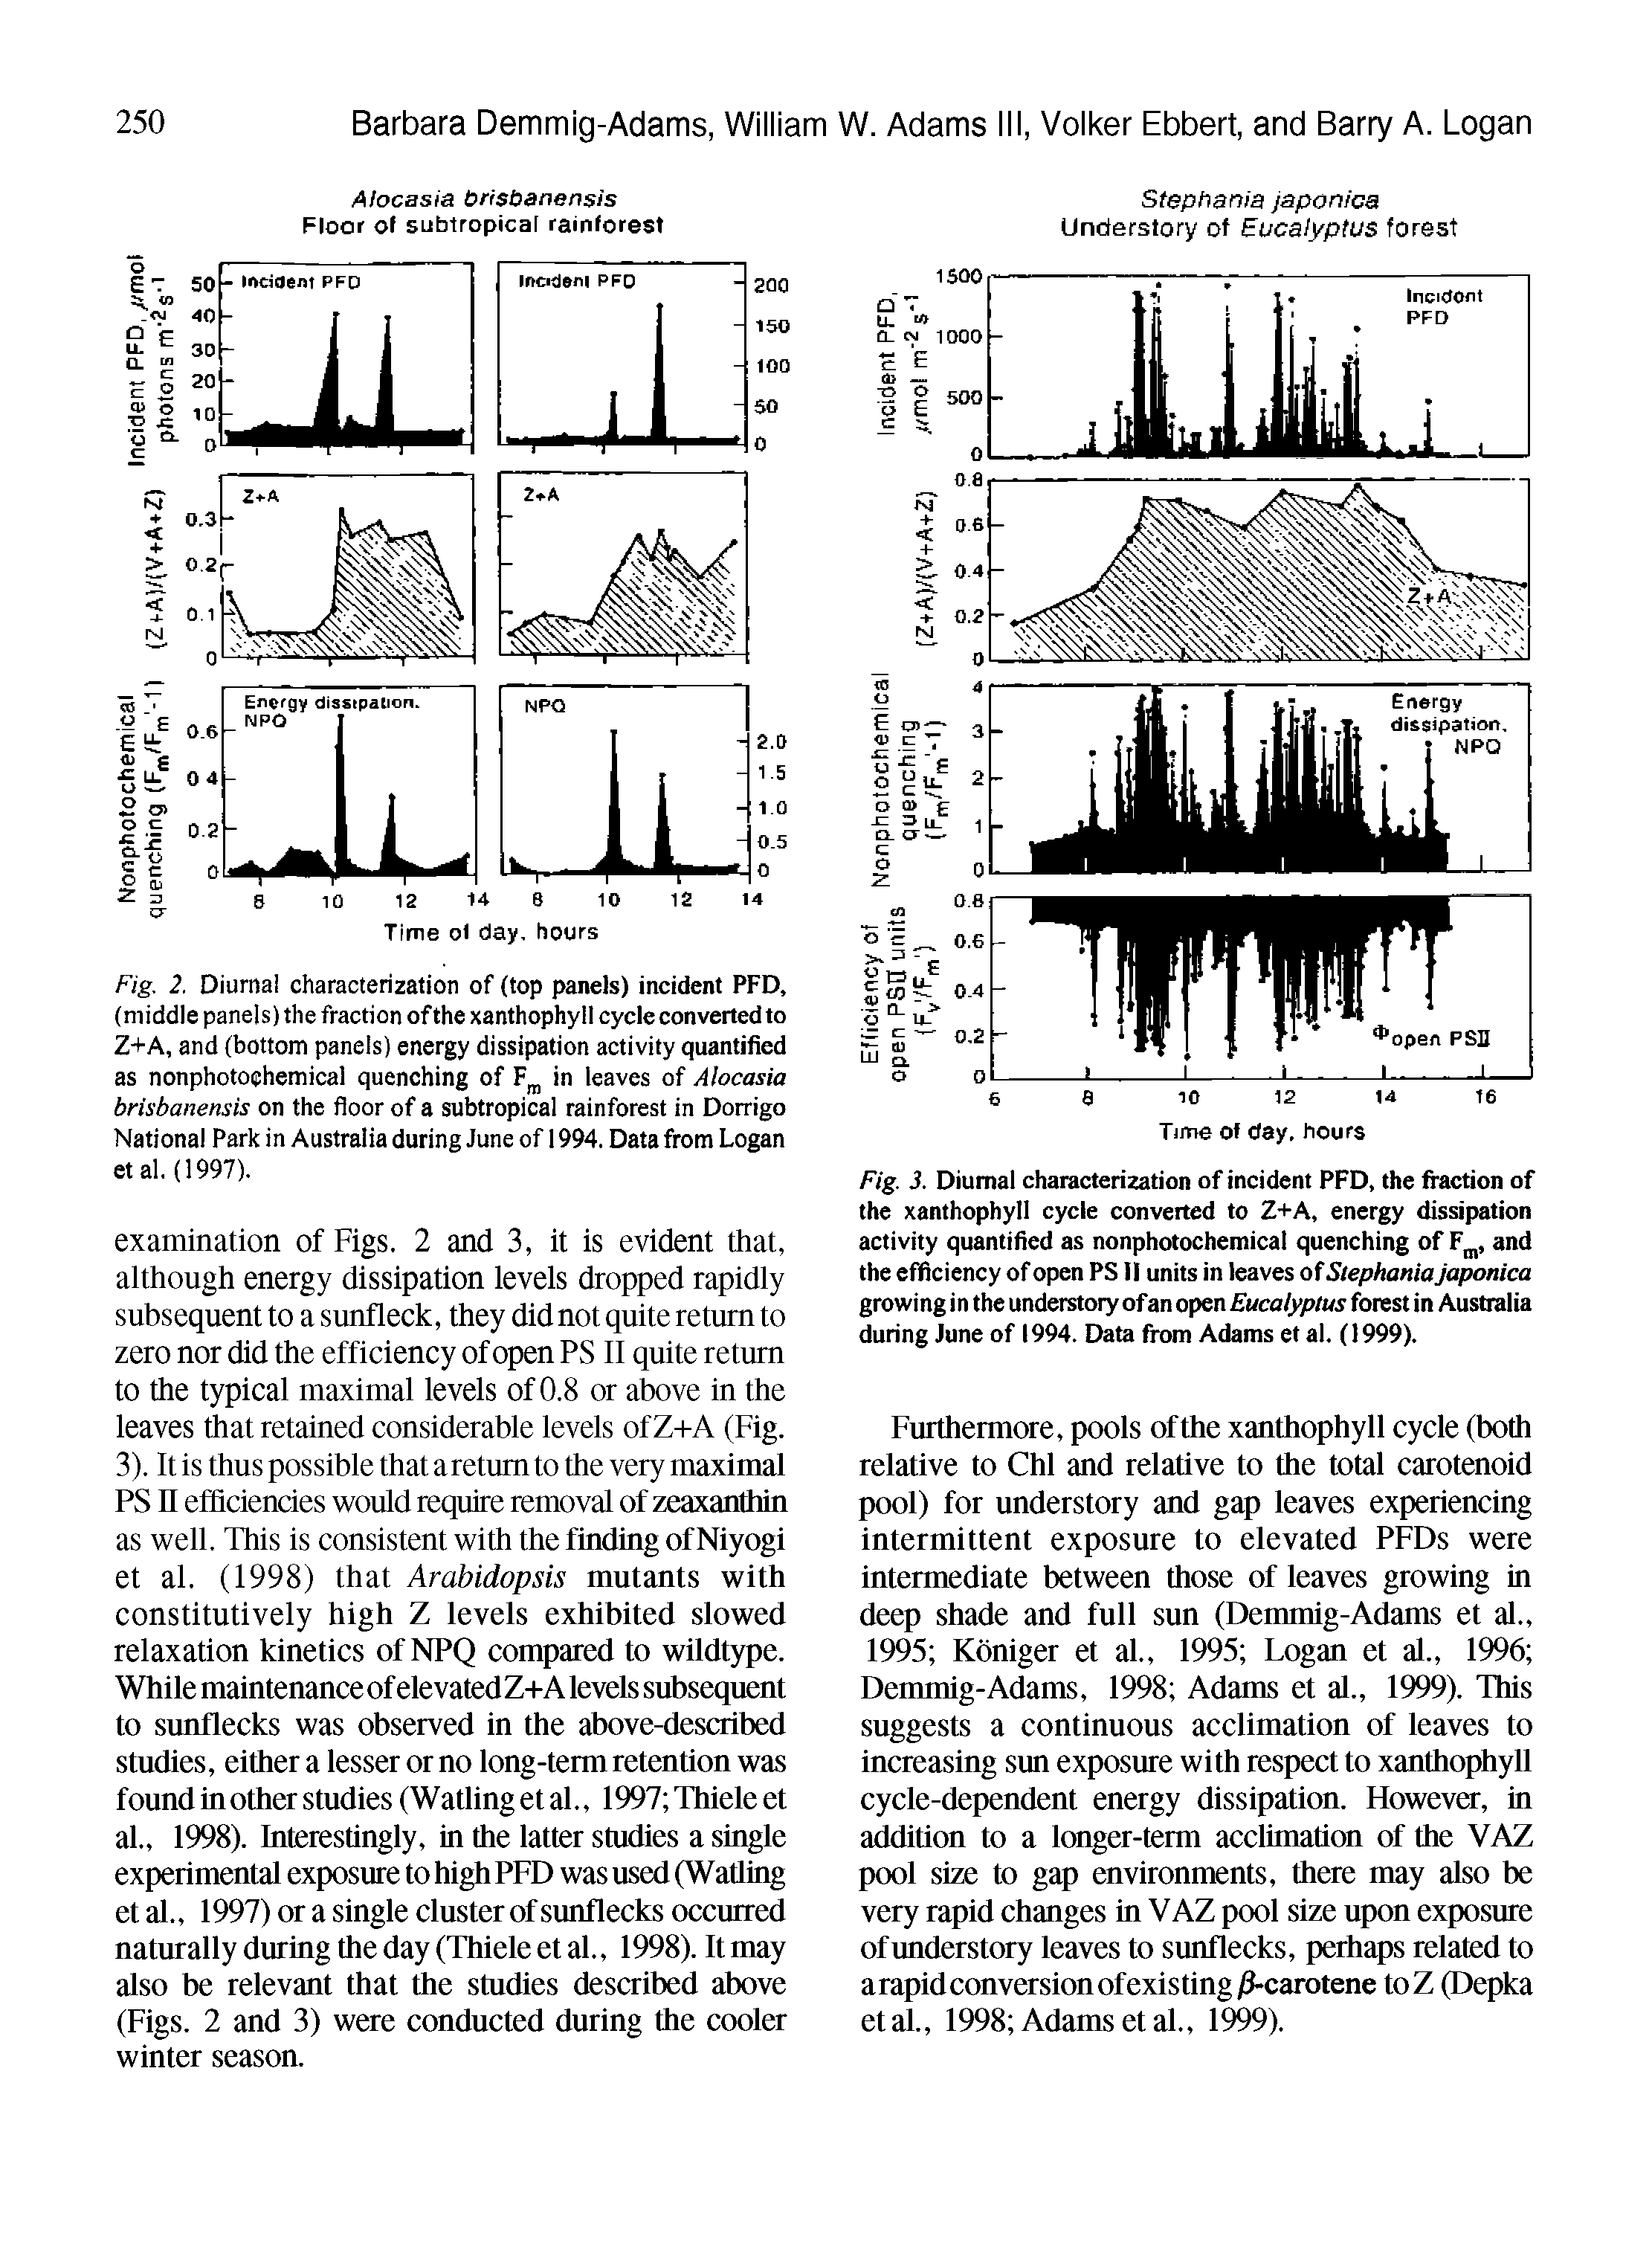 Fig. 2. Diurnal characterization of (top panels) incident PFD, (middle panels) the fraction ofthe xanthophyll cycle converted to Z+A, and (bottom panels) energy dissipation activity quantified as nonphotochemical quenching of F , in leaves of Alocasia brisbanensis on the floor of a subtropical rainforest in Dorrigo National Park in Australia during June of 1994. Data from Logan etal. (1997).